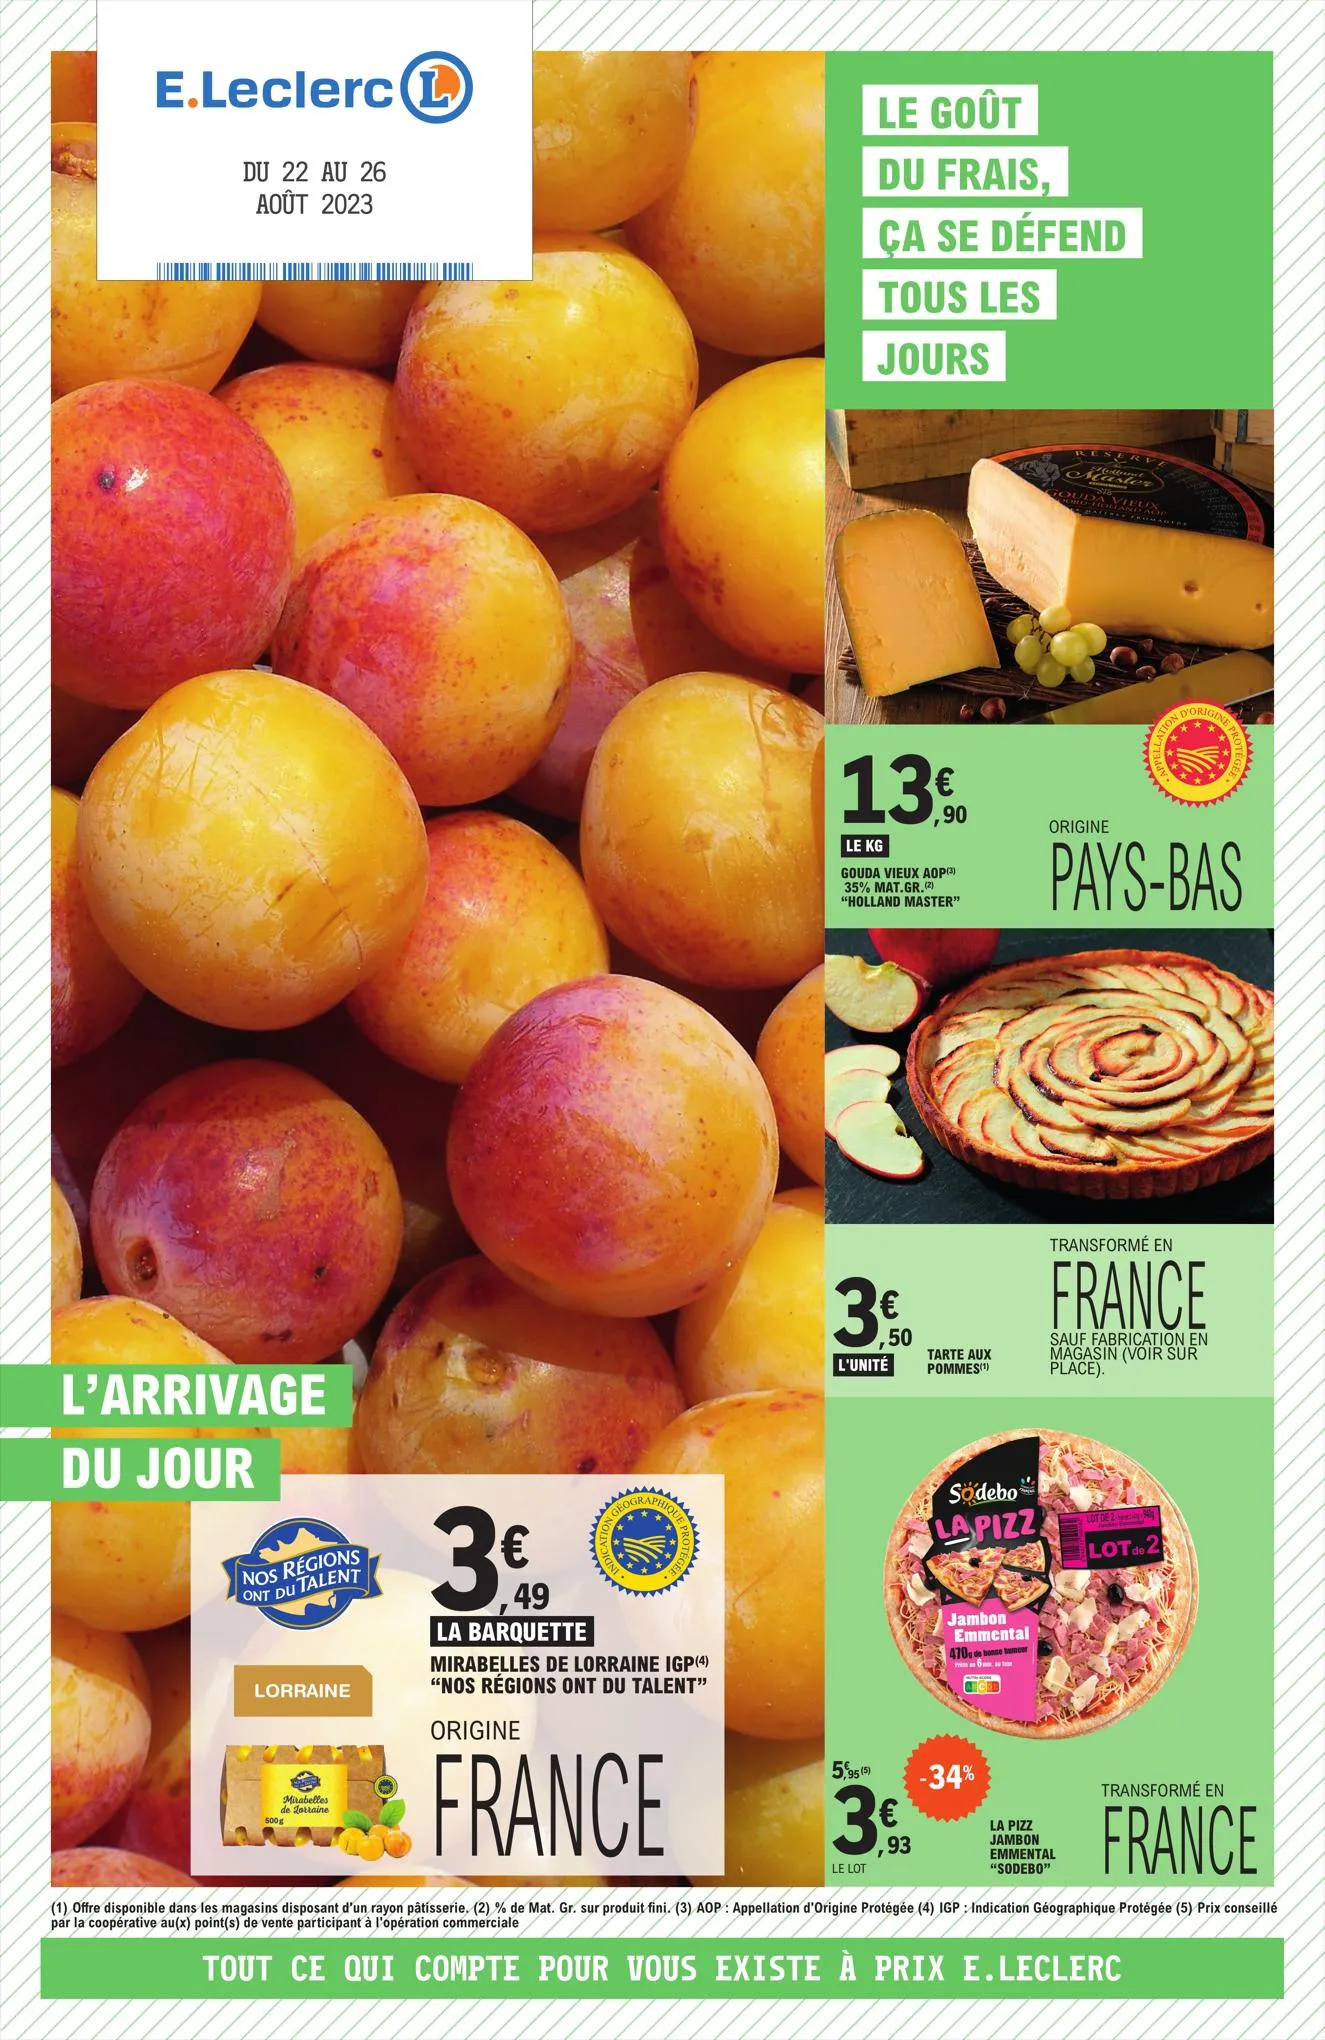 Catalogue Relance Alimentaire 11 - Mixte, page 00001